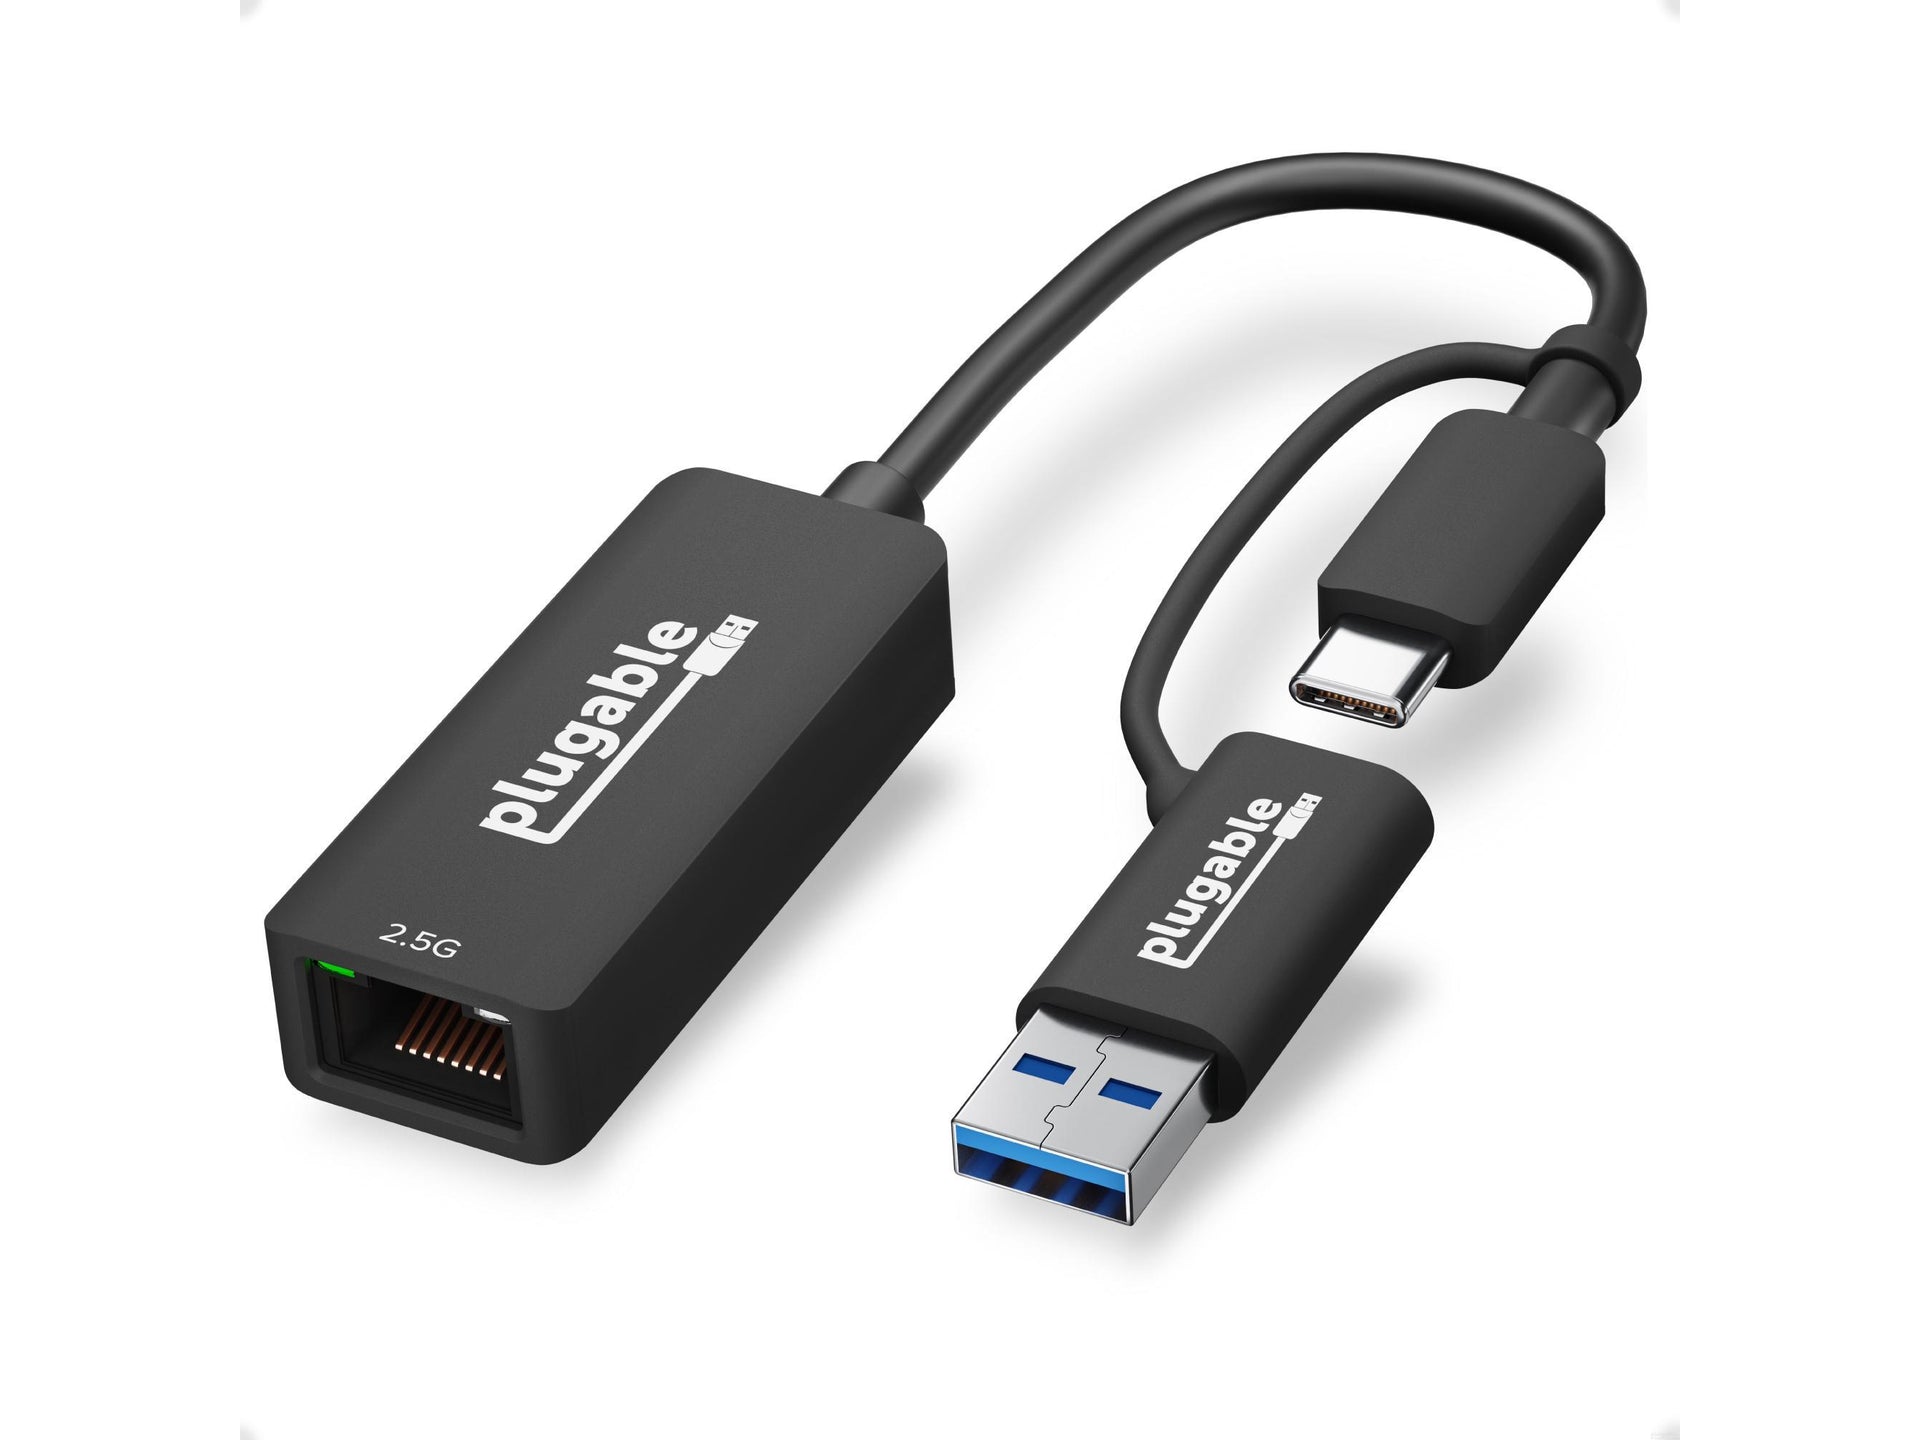 Plugable and USB to Ethernet Adapter – Technologies